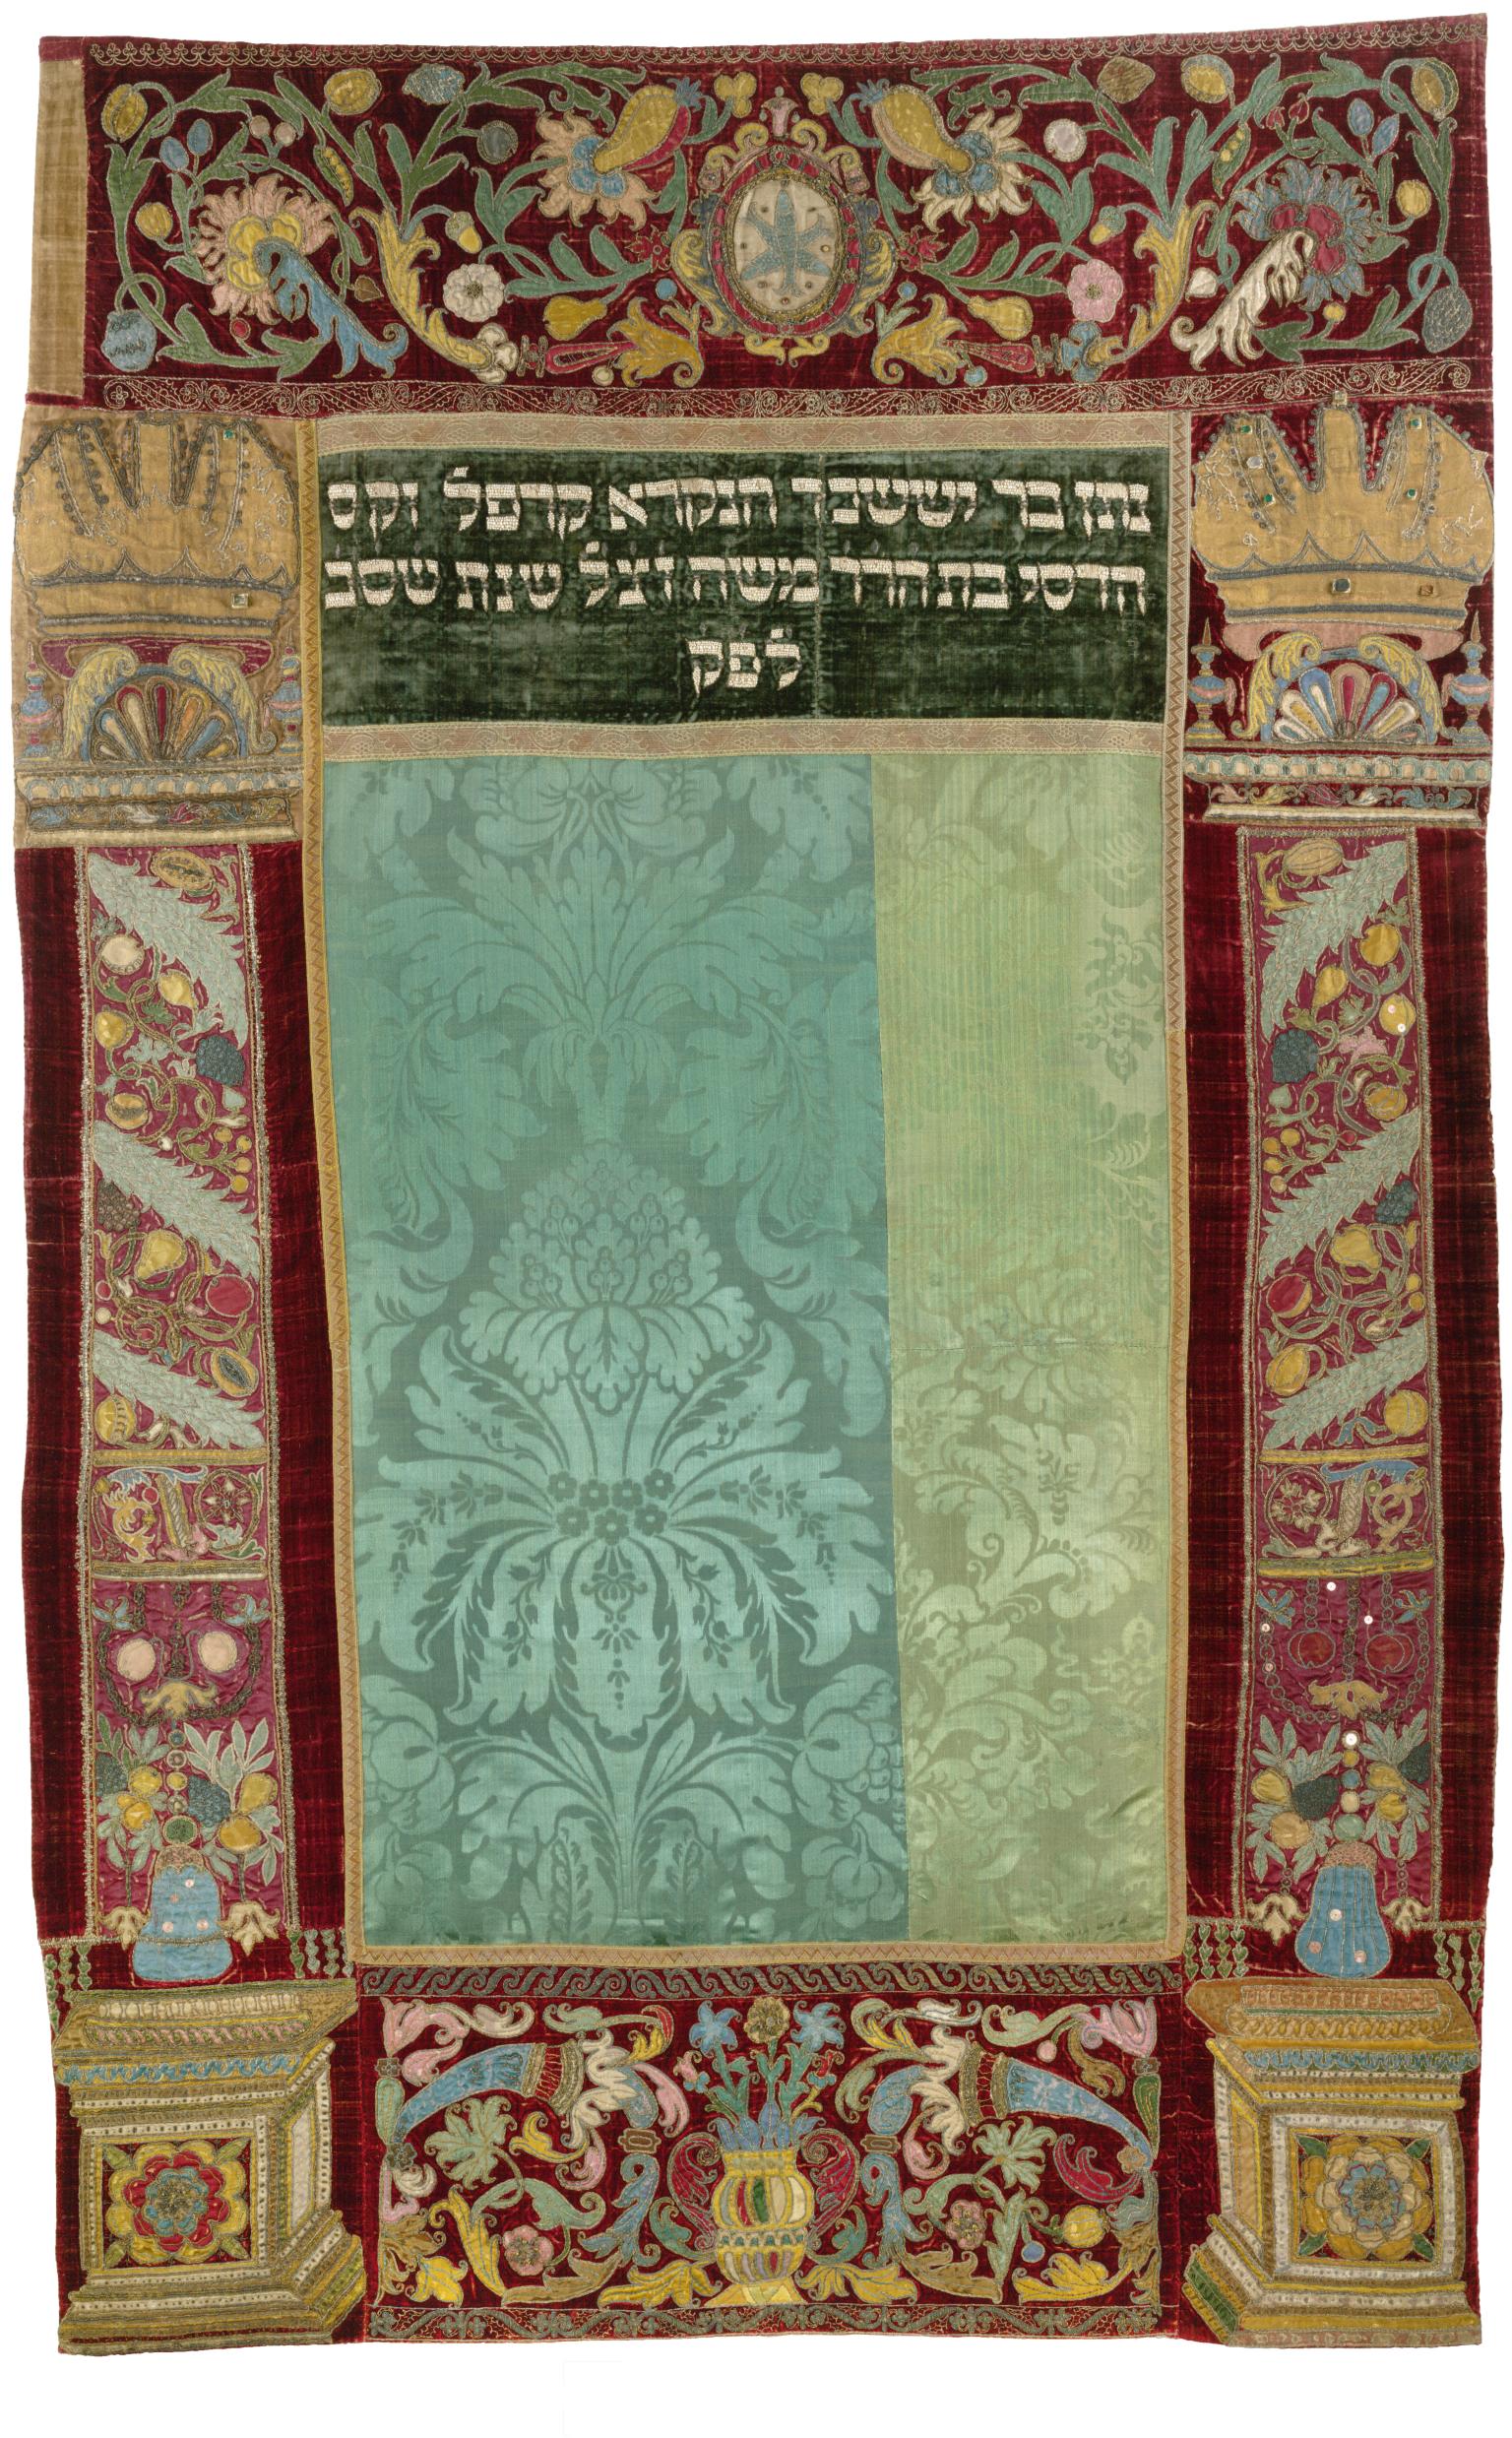 Embroidered curtain of columns with crowns on left and right sides and decorative floral motifs throughout, and Hebrew text in top center.